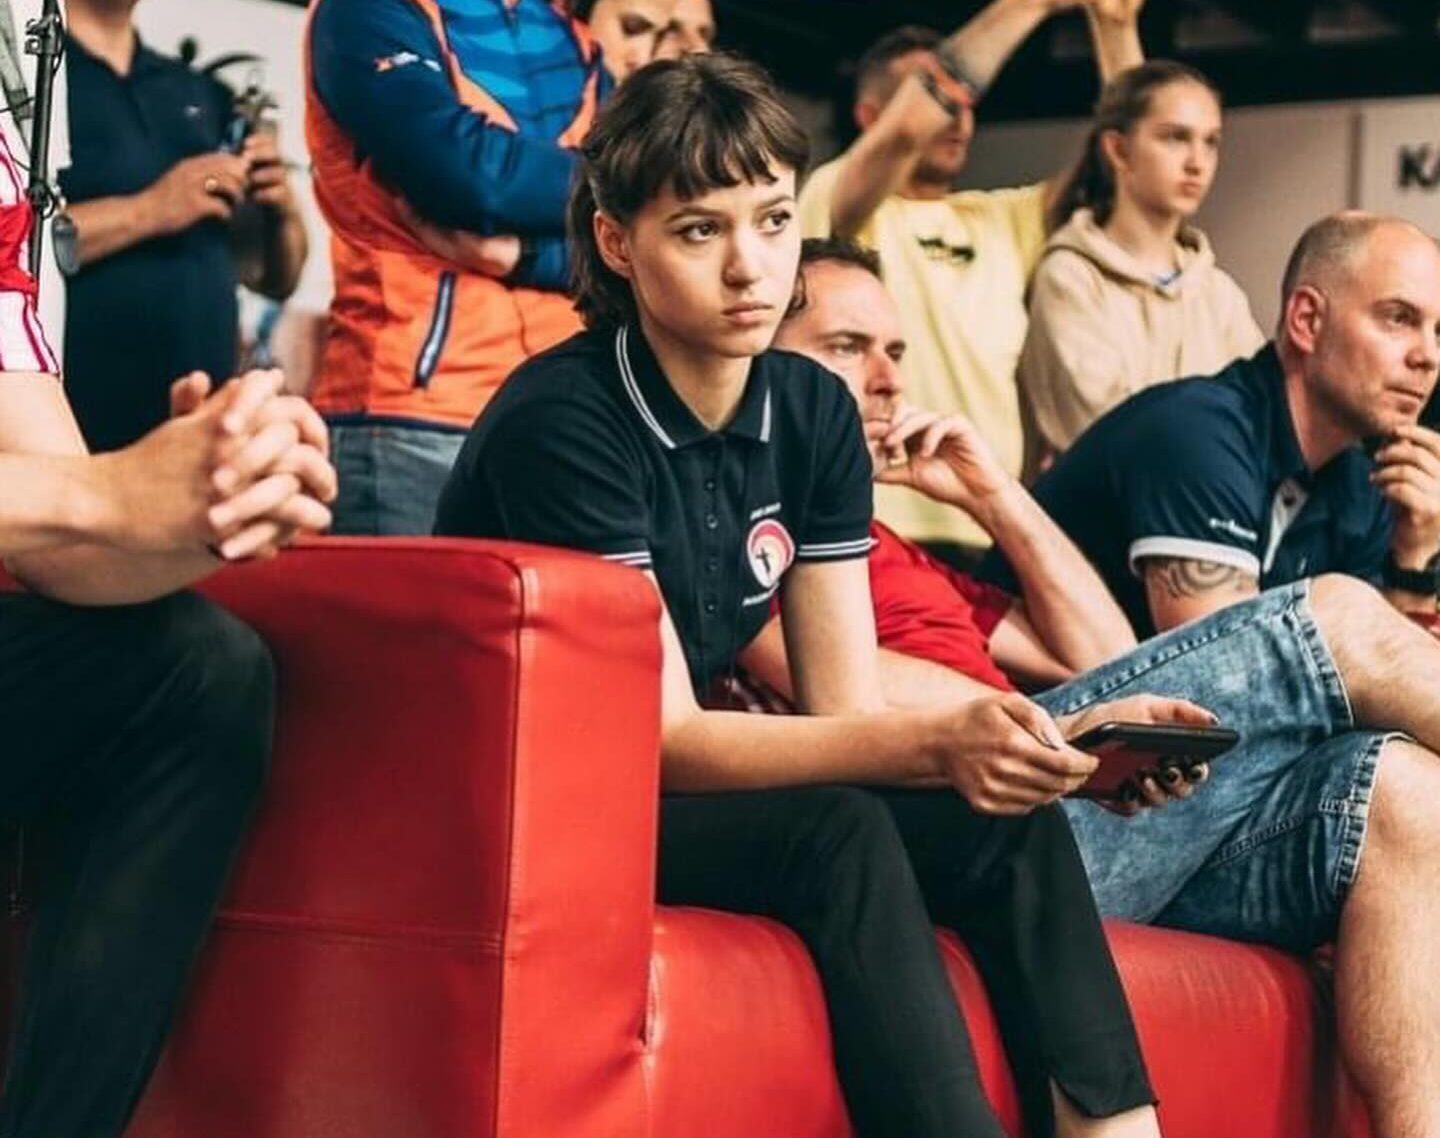 The youngest referee in the European Team Division 3 Championships